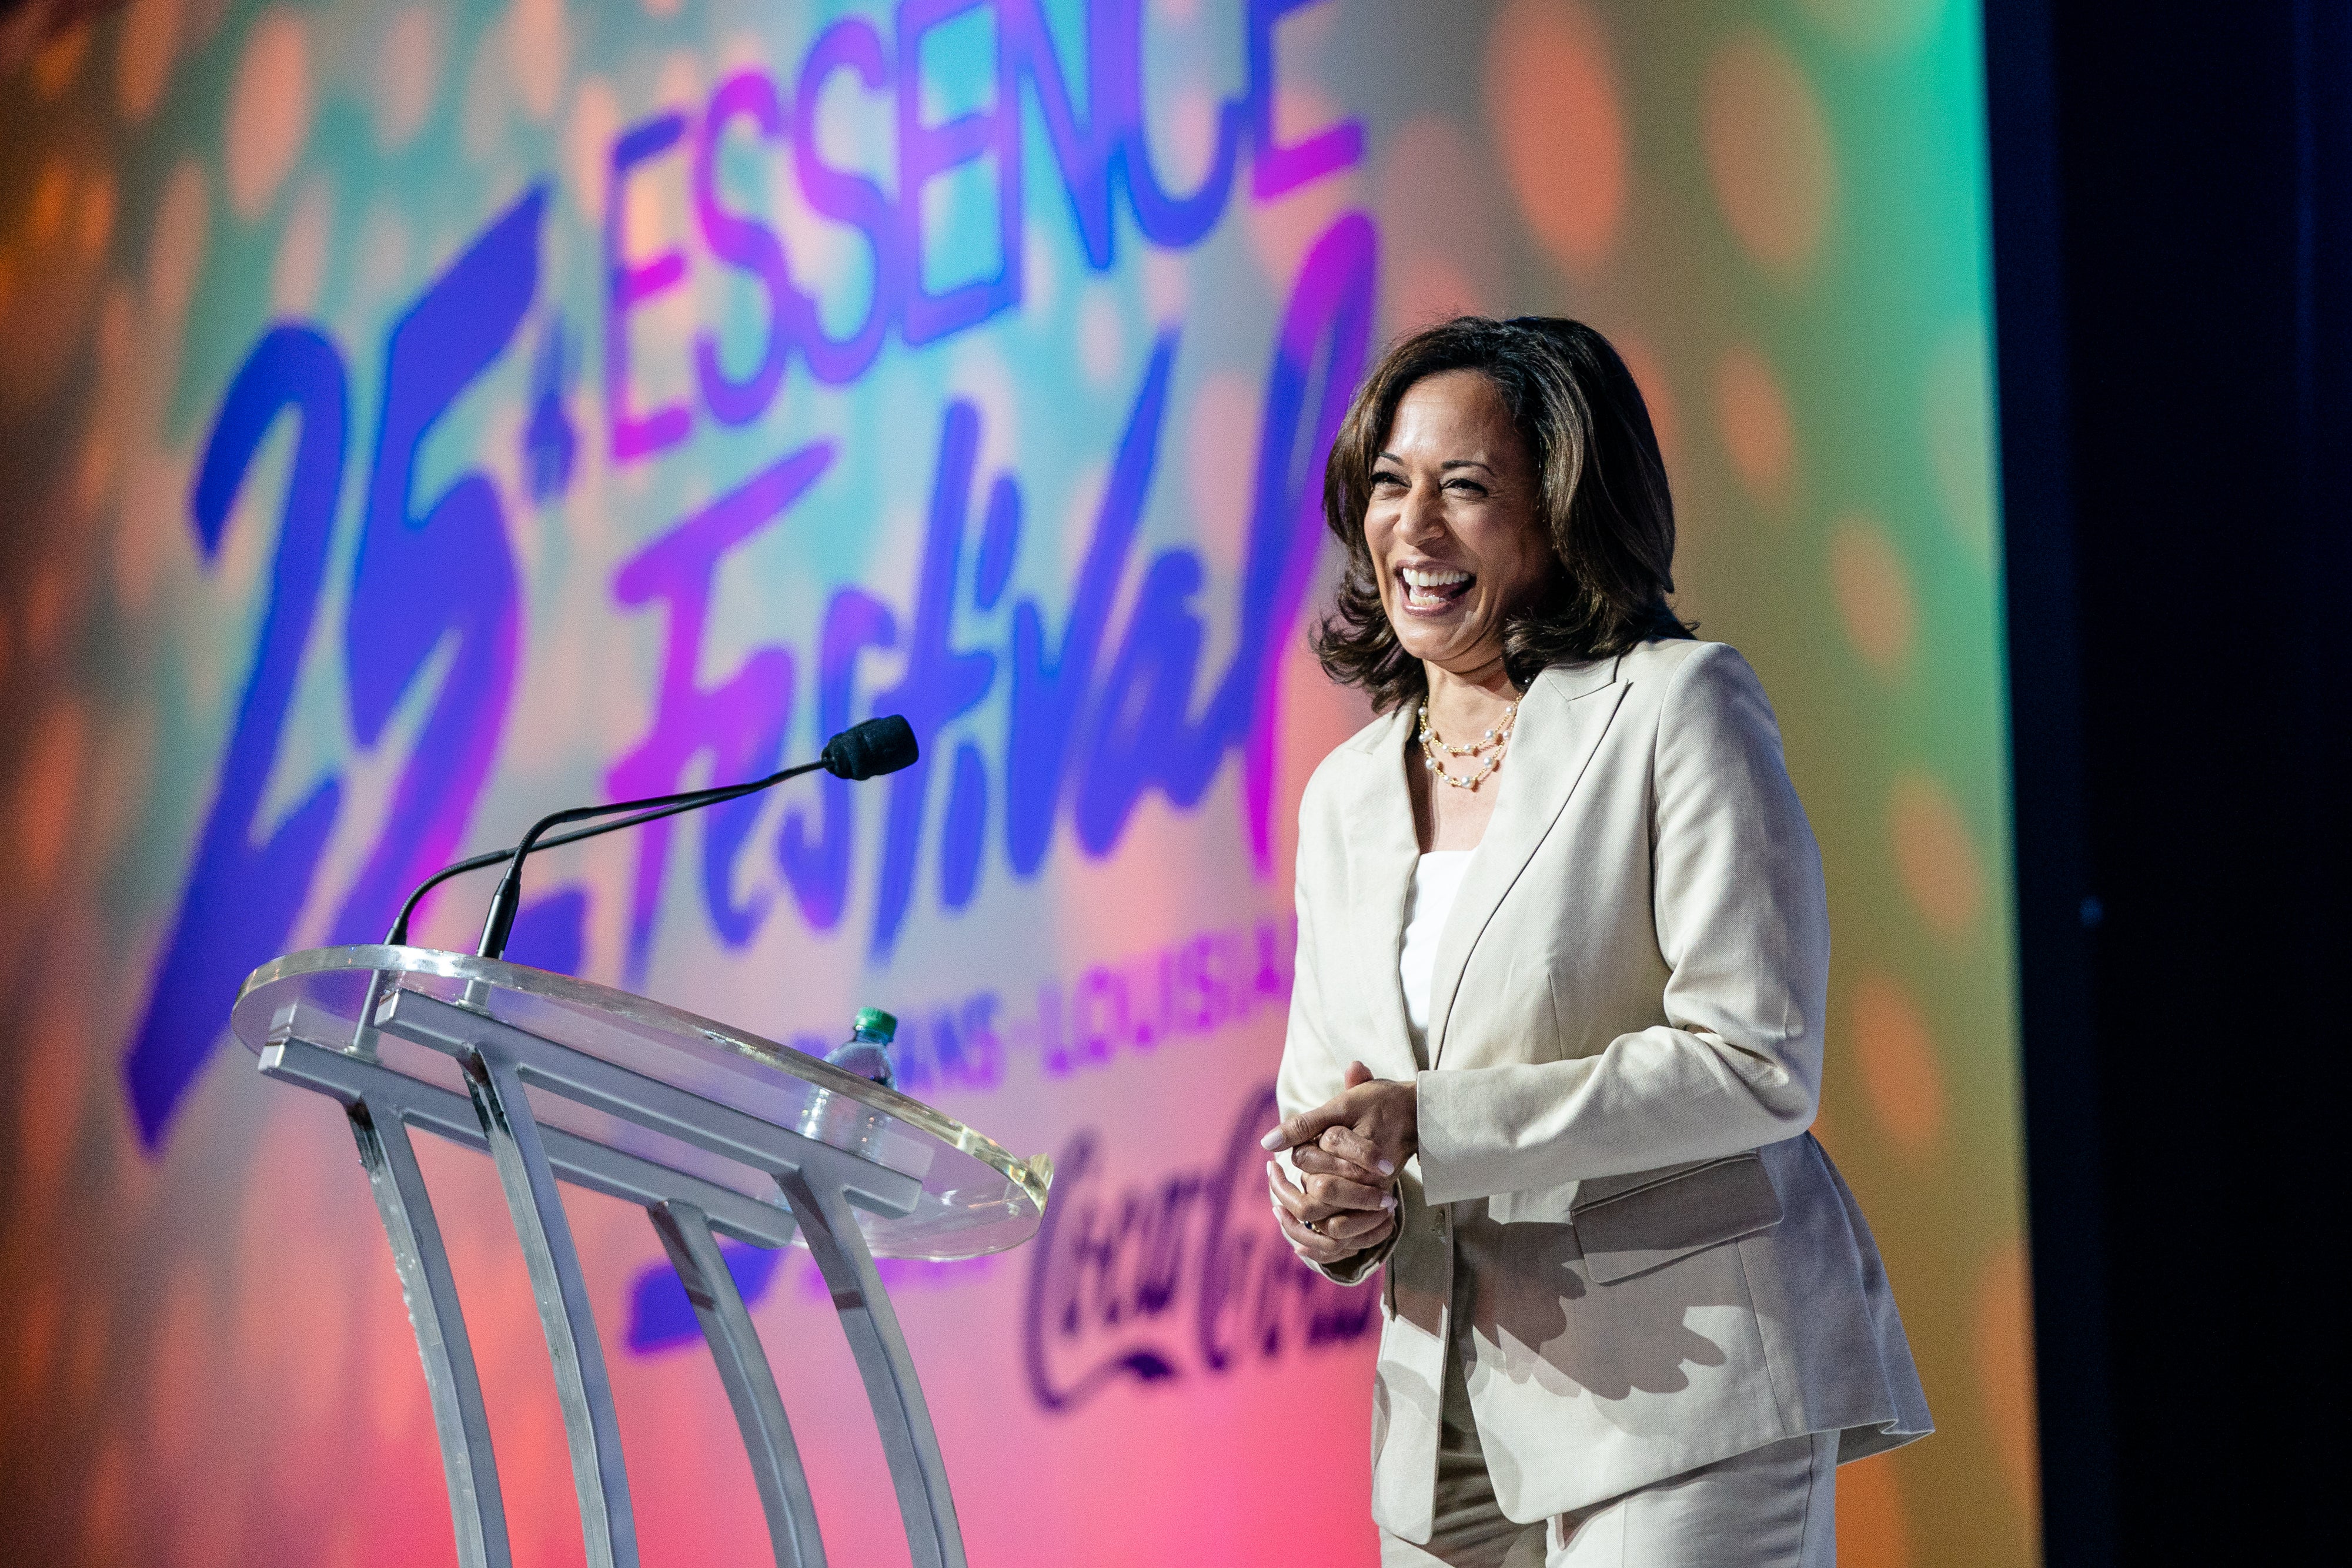 Opinion: My Visceral Reaction To Kamala Harris Ending Her Campaign Even Surprised Me